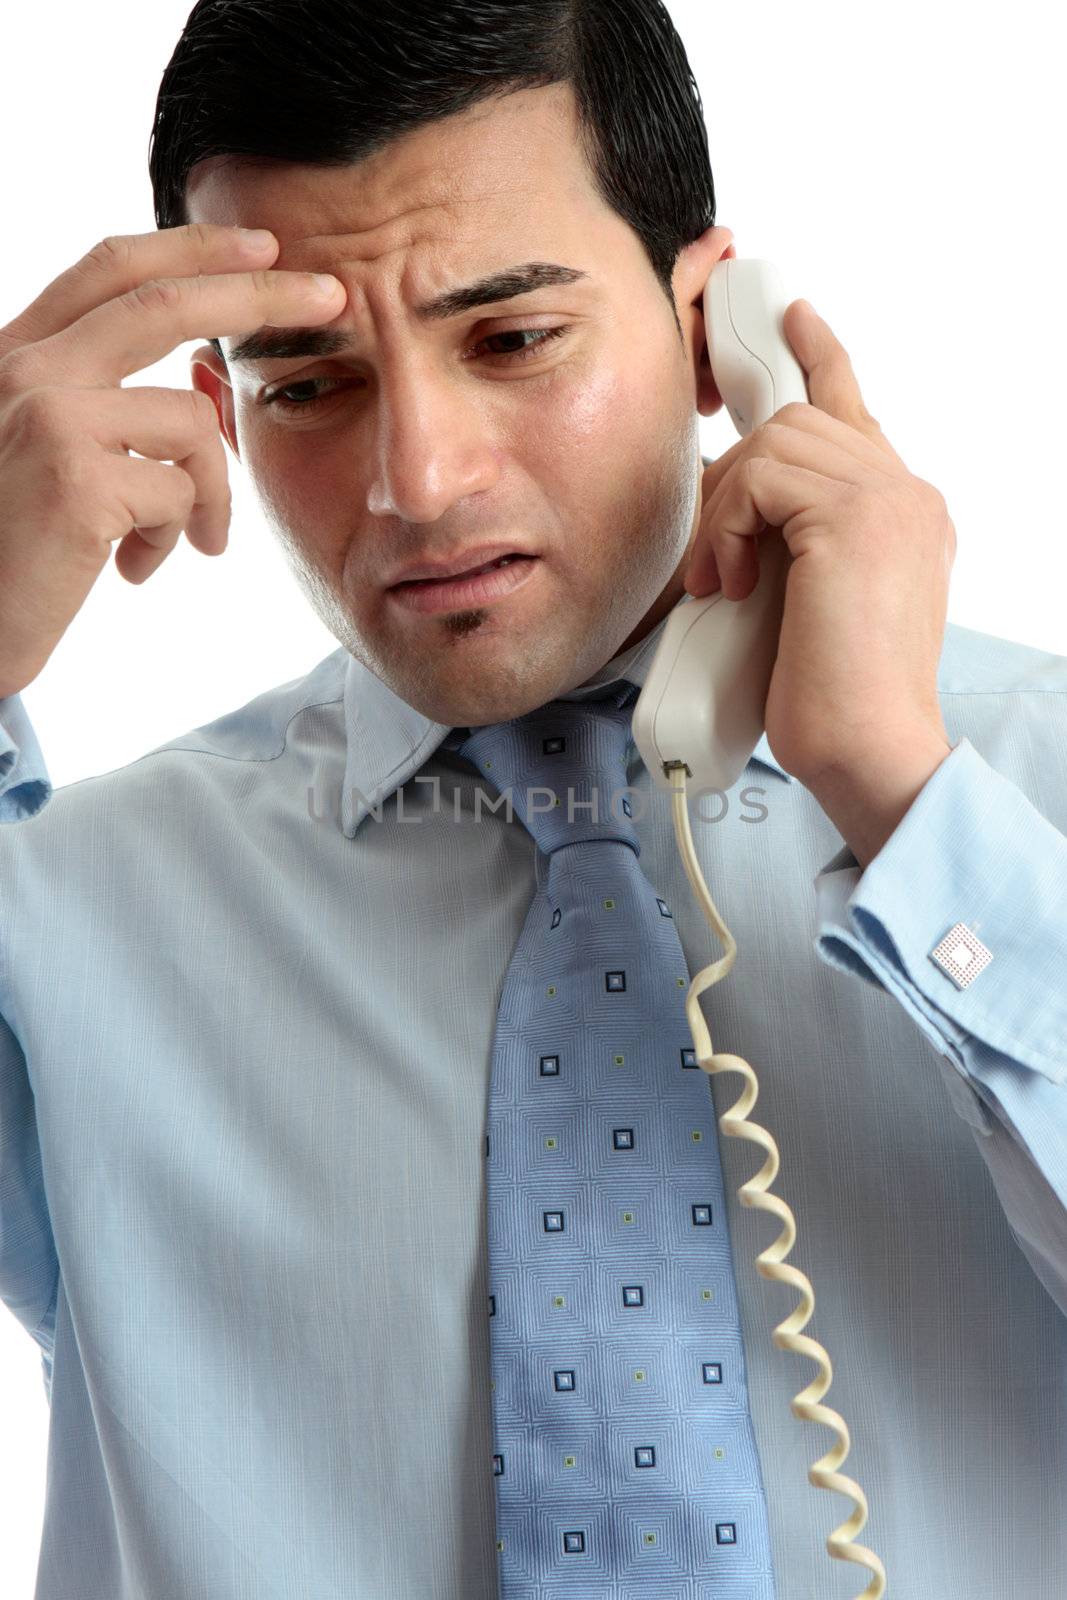 Stressed, depressed, worried or upset business man using telephone.  Useful for many situations.  White background.